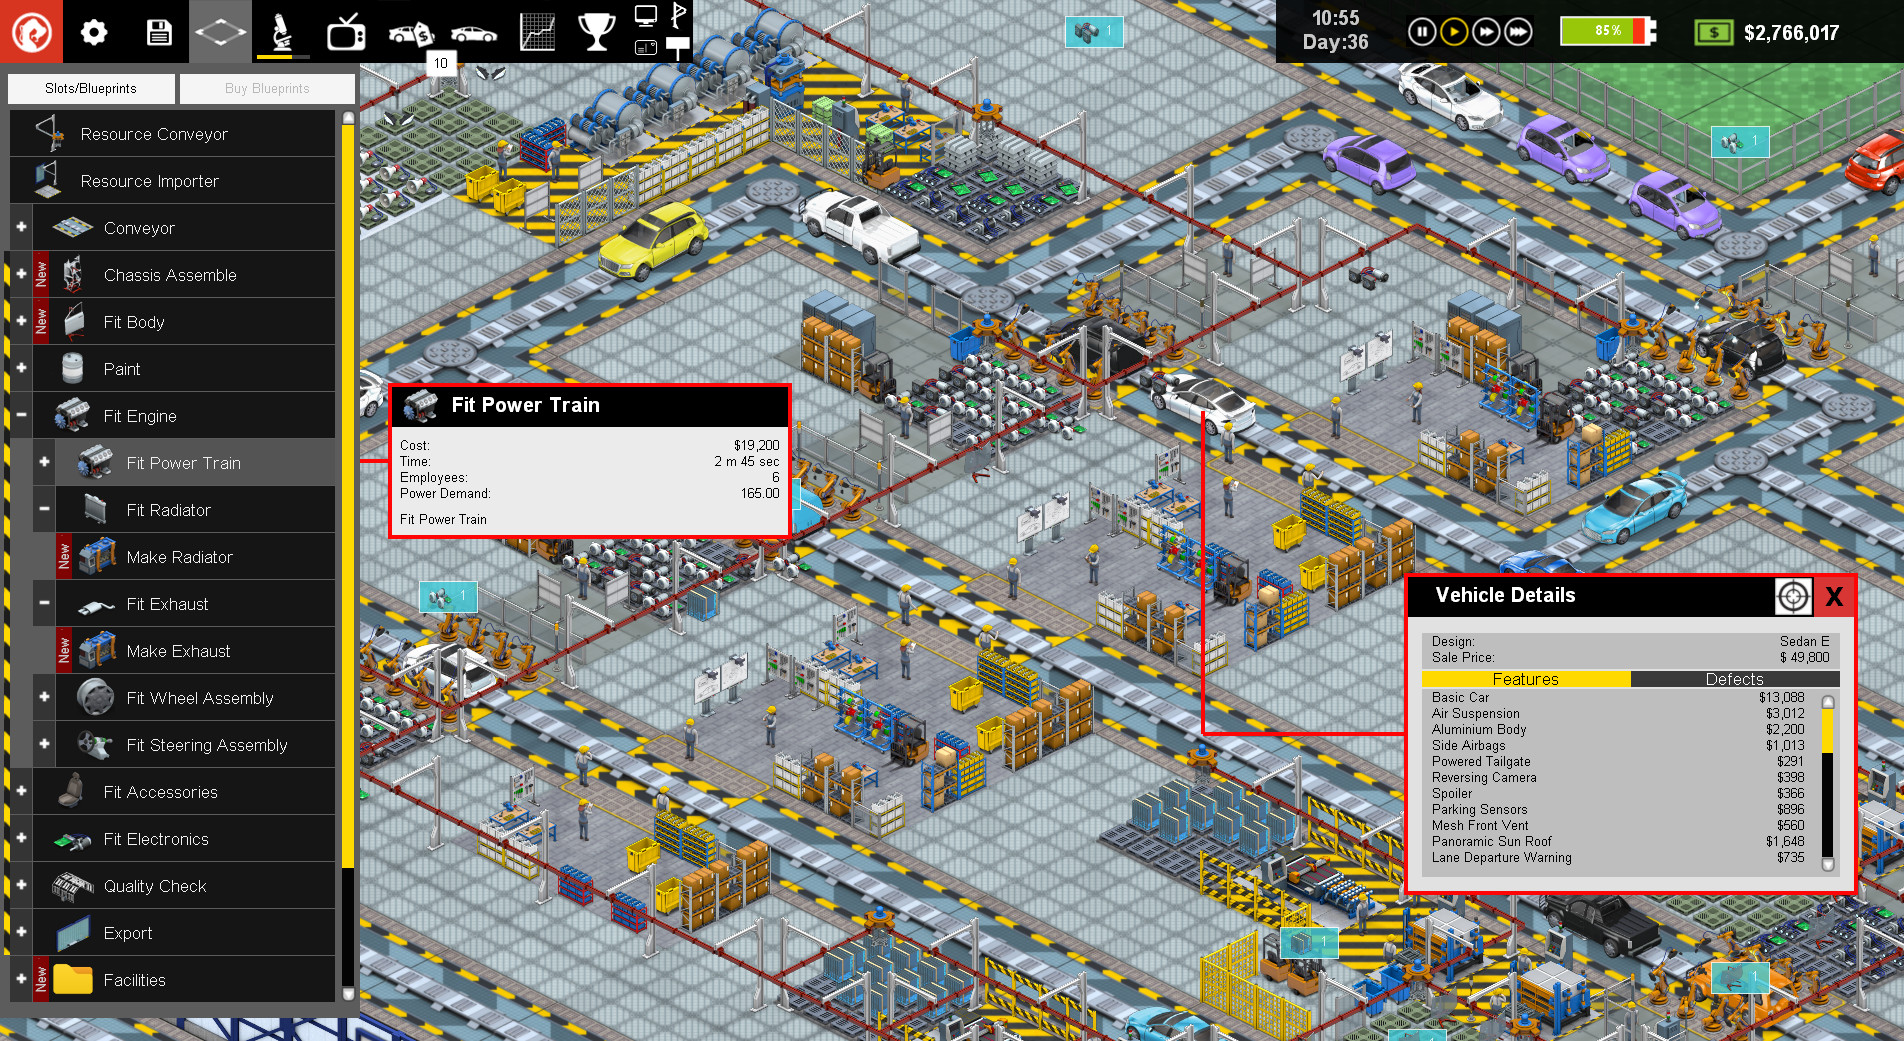 Production Line : Car factory simulation Free Download